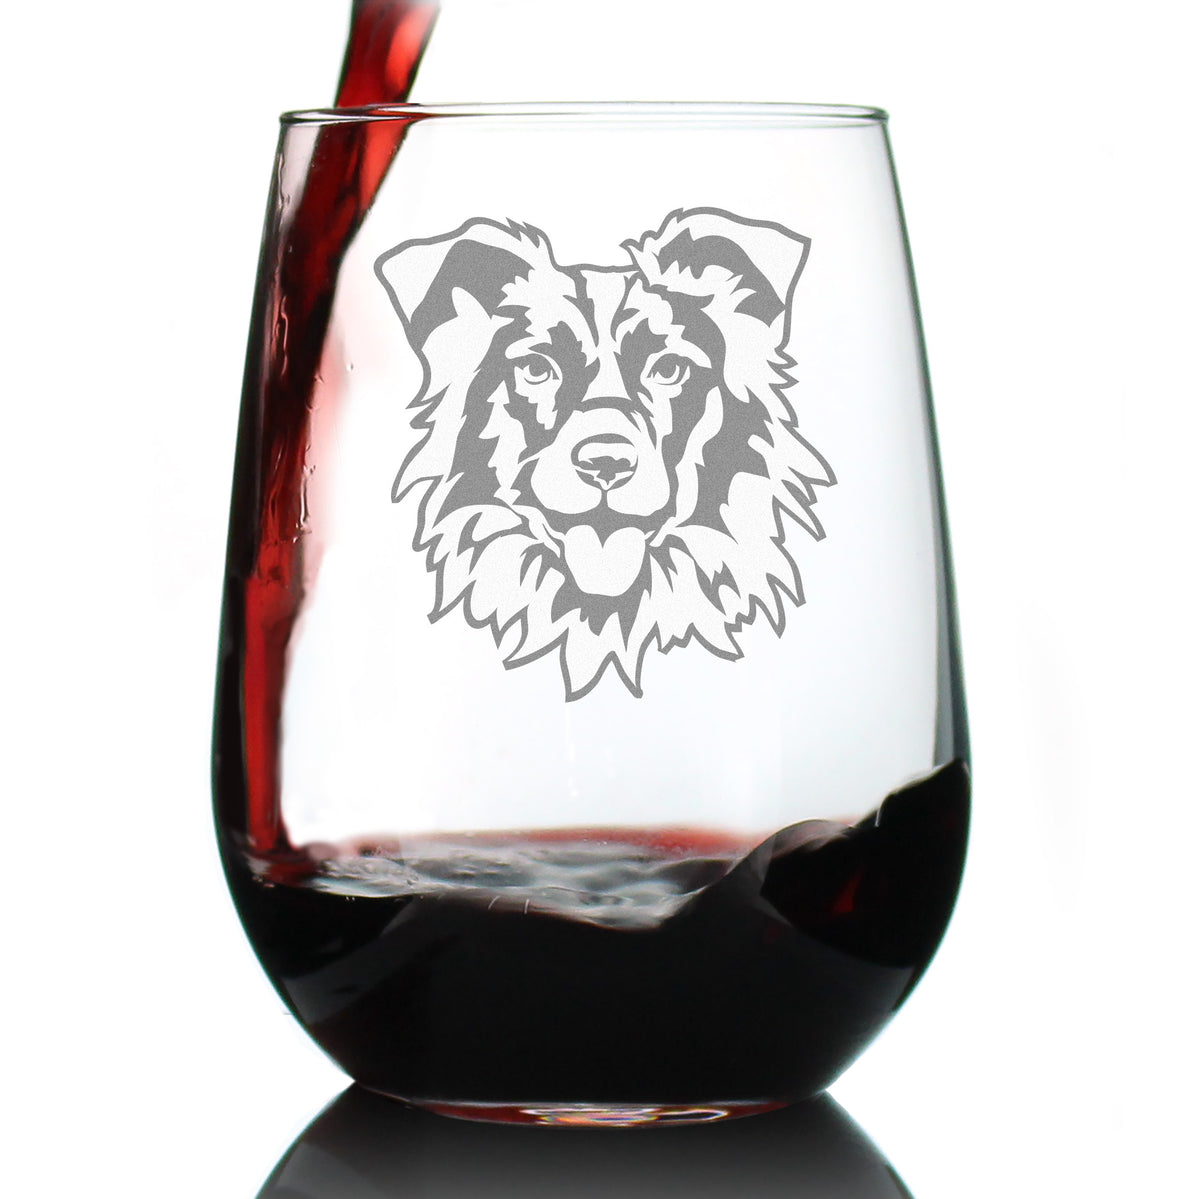 Border Collie Stemless Wine Glass - Cute Dog Themed Décor and Gifts for Moms &amp; Dads of Border Collies - Large 17 Oz